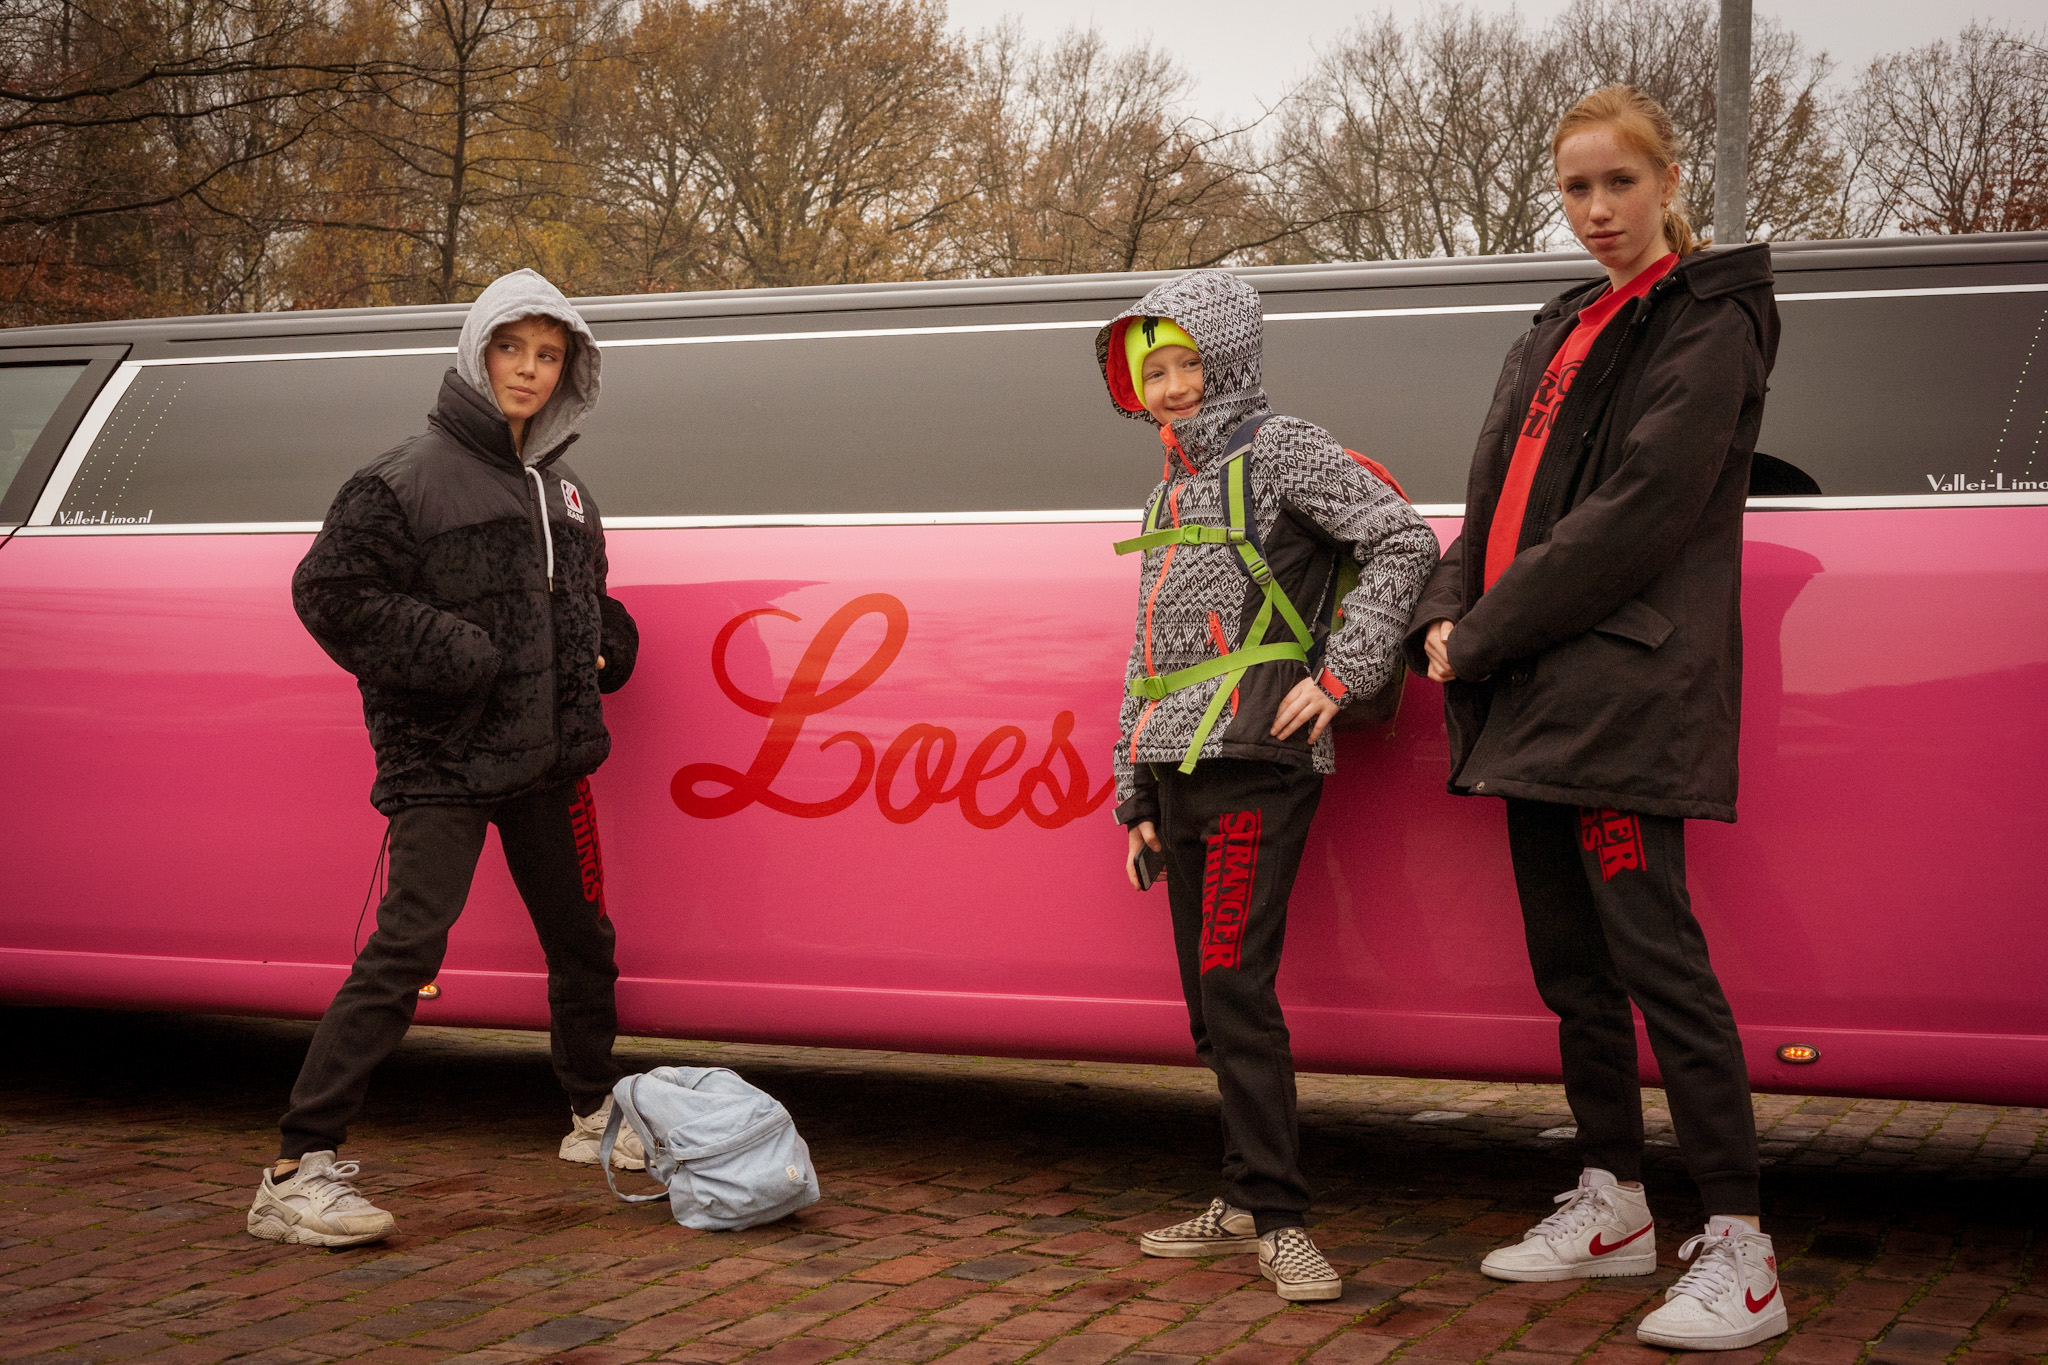 Stranger Things outfit voor de Loes' limo